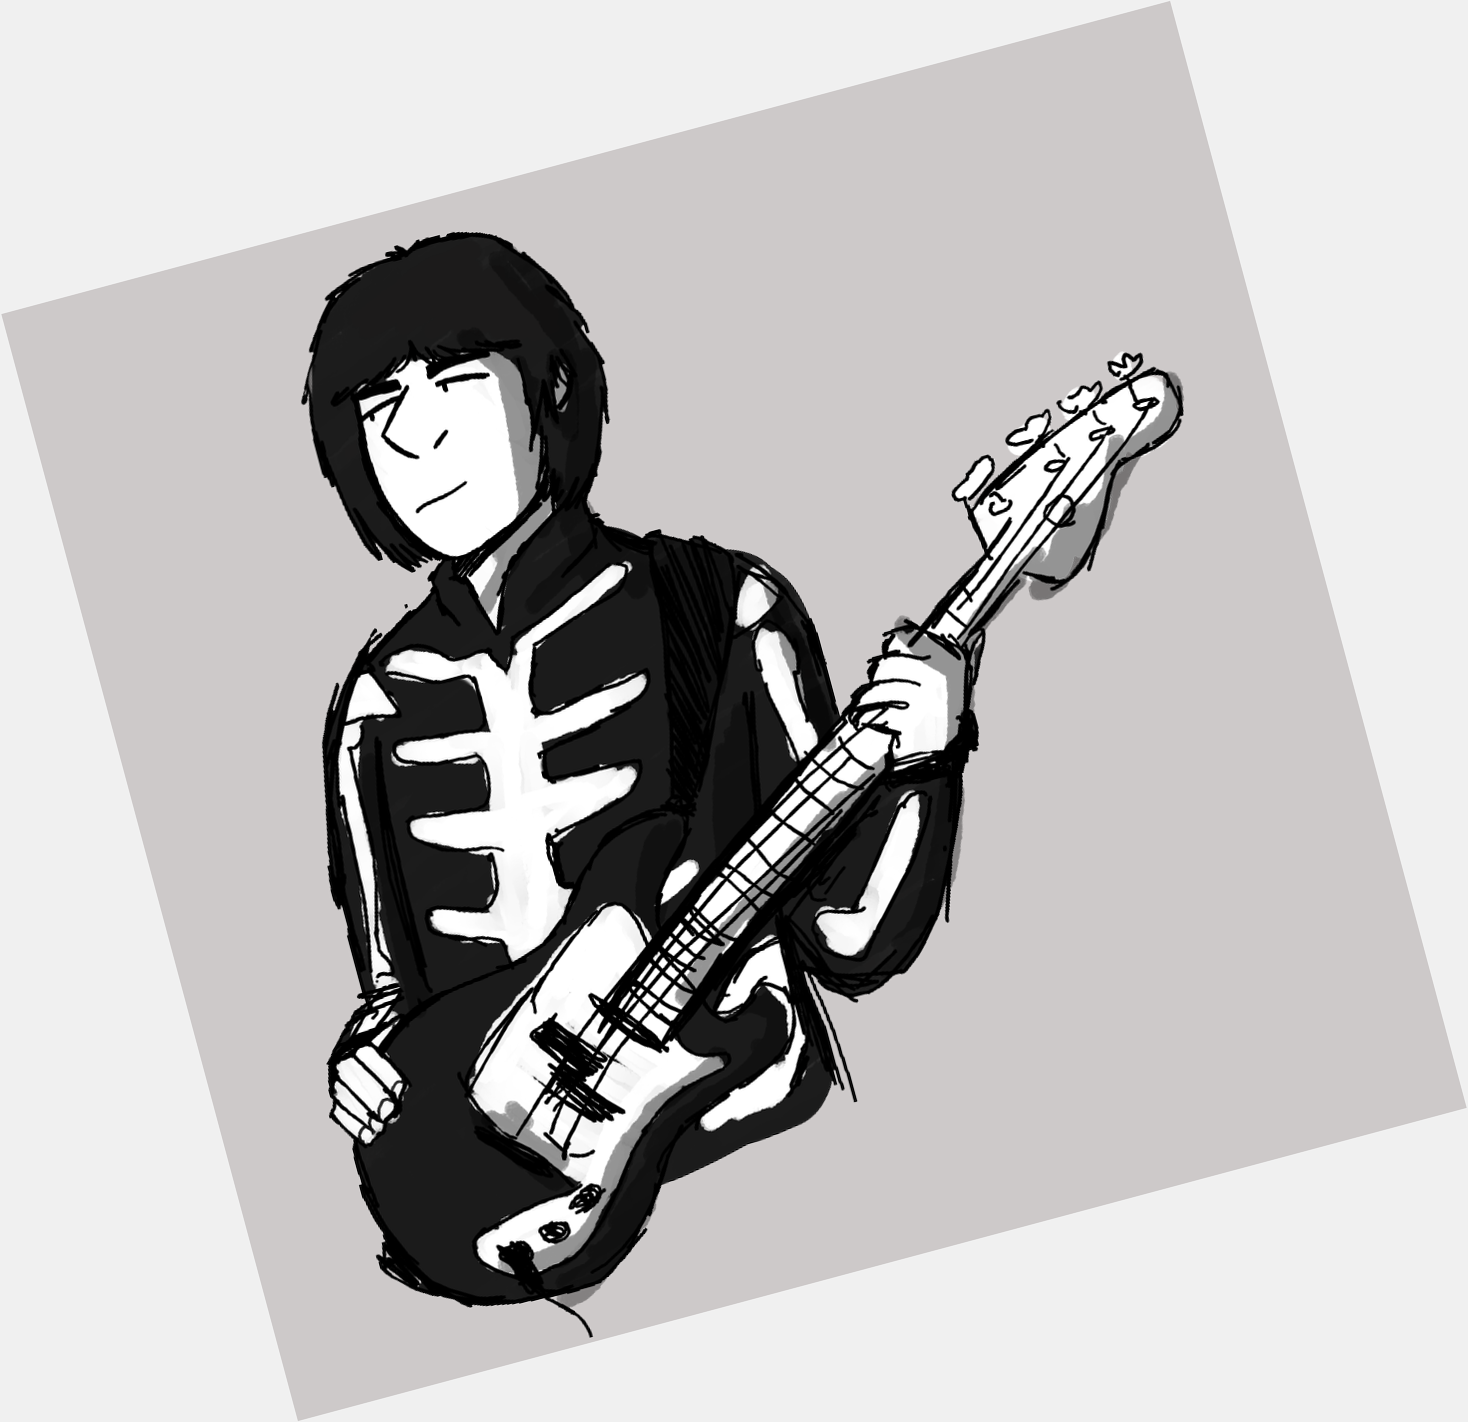 I\m late but happy birthday john entwistle here\s an absolutely pitiful scribble 